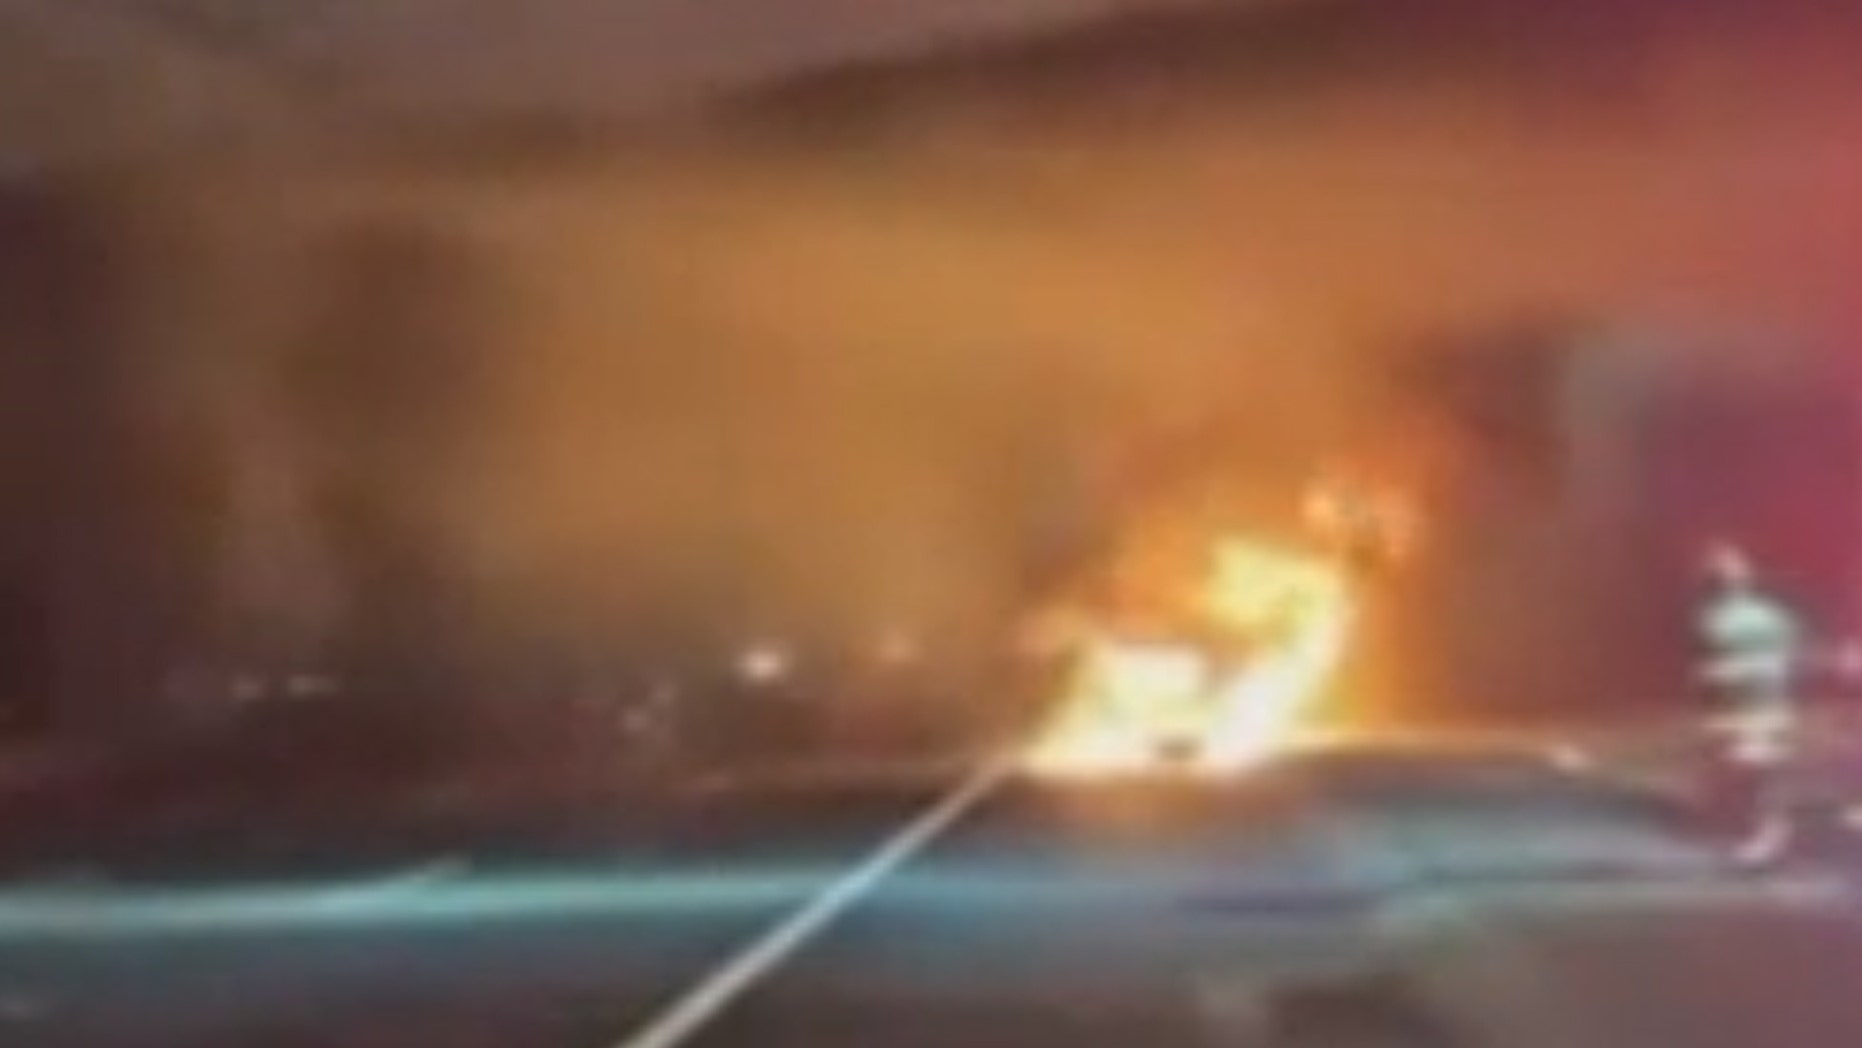 Miracle on I-80: A fiery crash and explosions, but only minor injuries